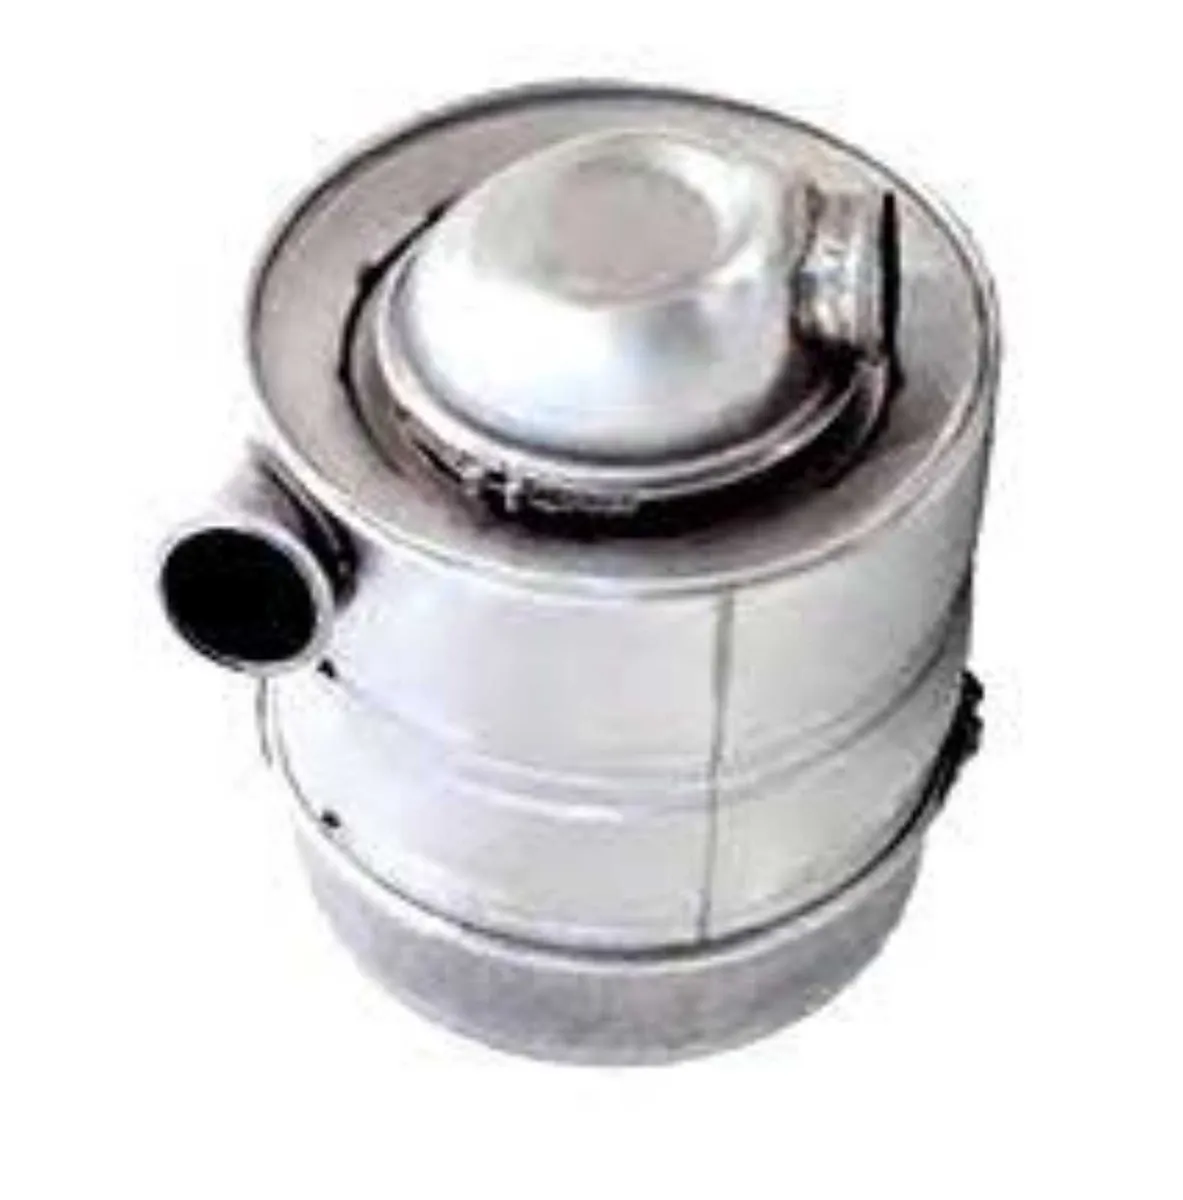 SCANIA CATALYTIC SILENCER - SAVE 20% - Image 1